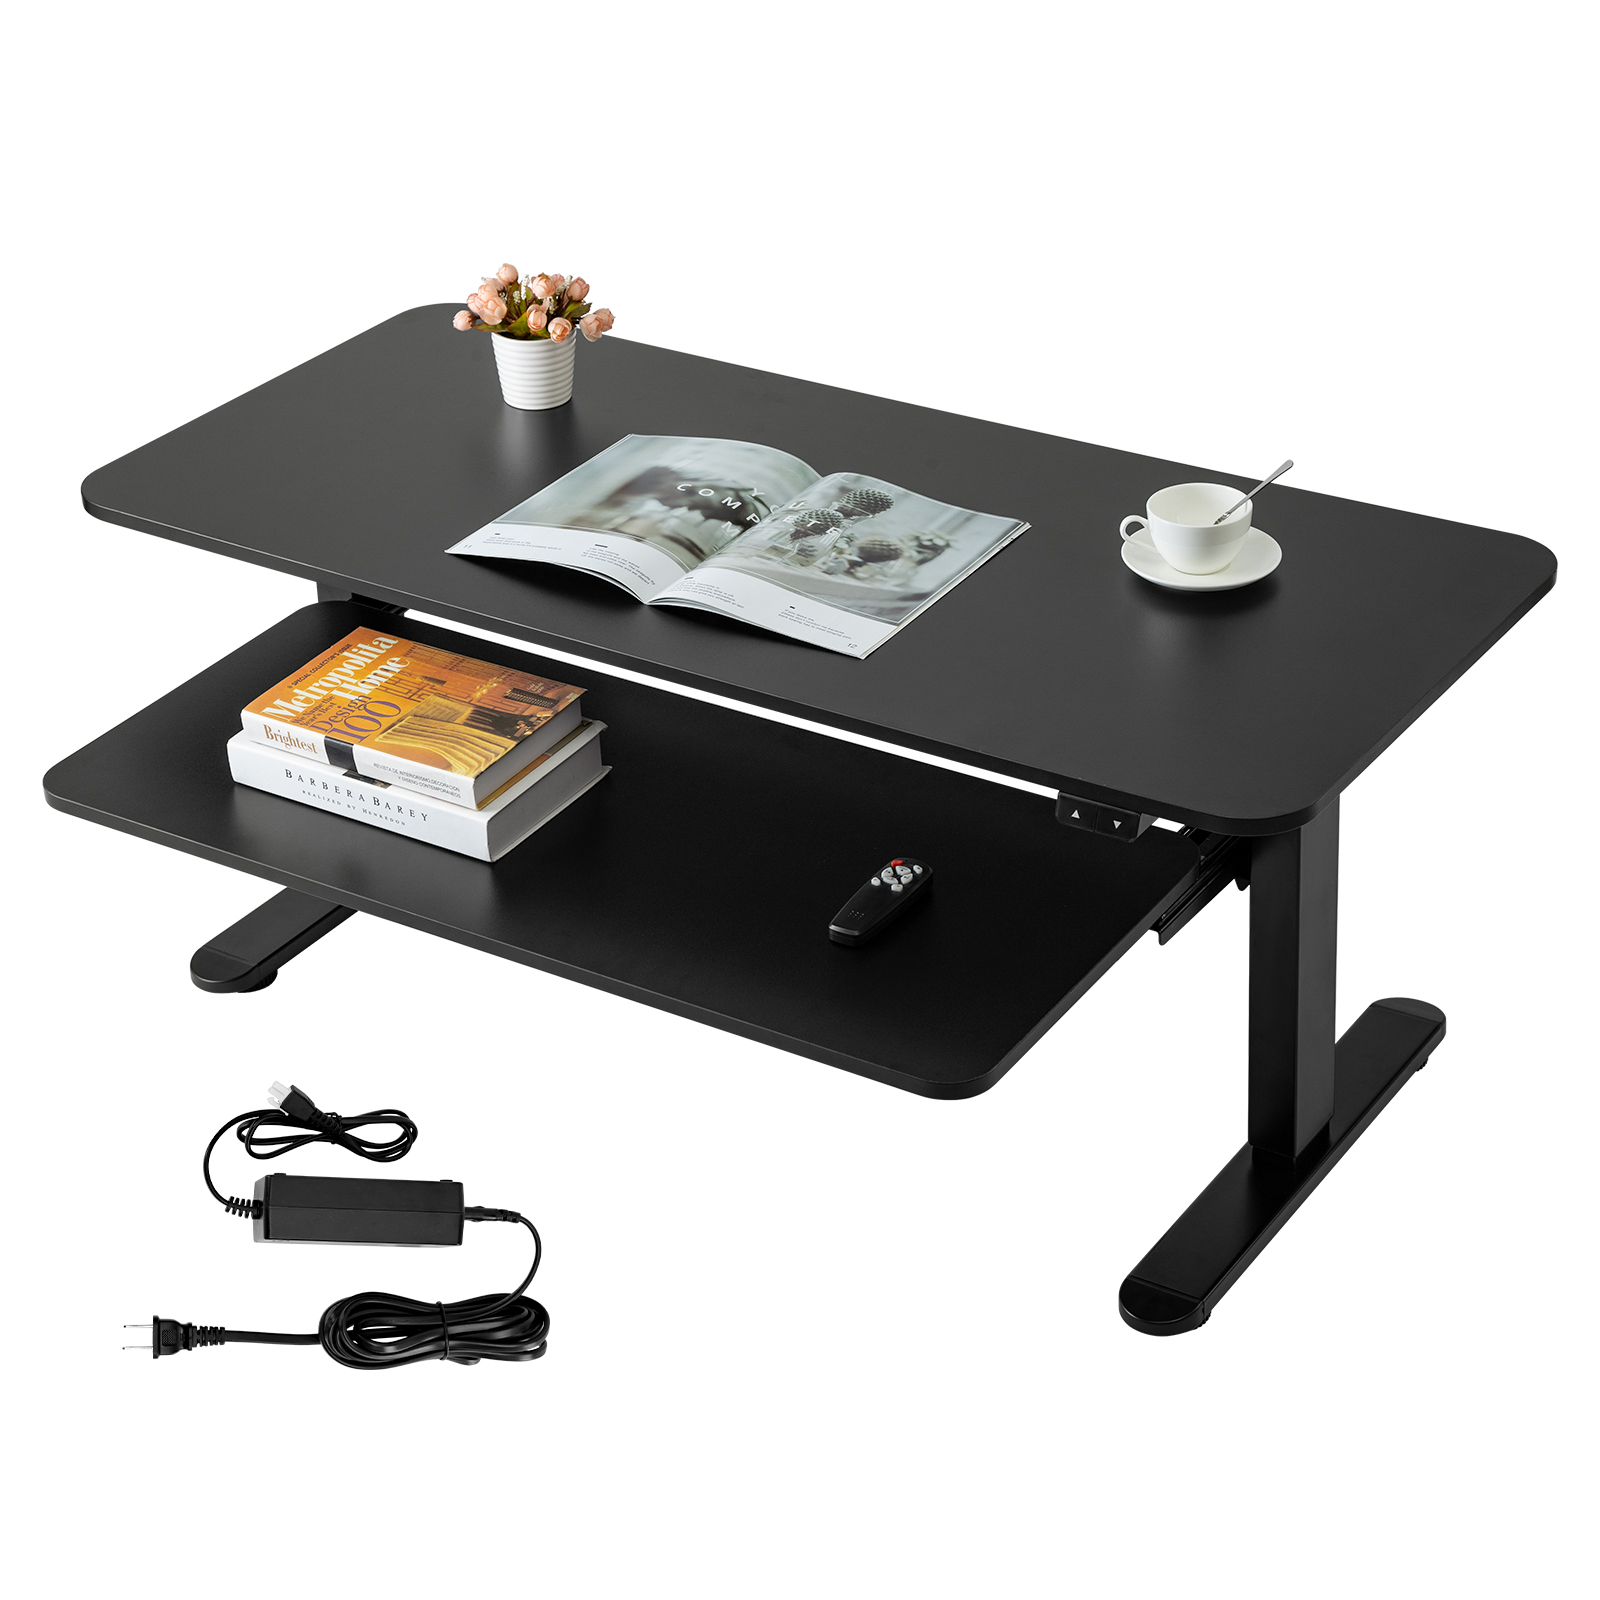 TOPSKY Electric Adjustable Coffee Table with Pull-Out Tray for Home and Office CT01.01